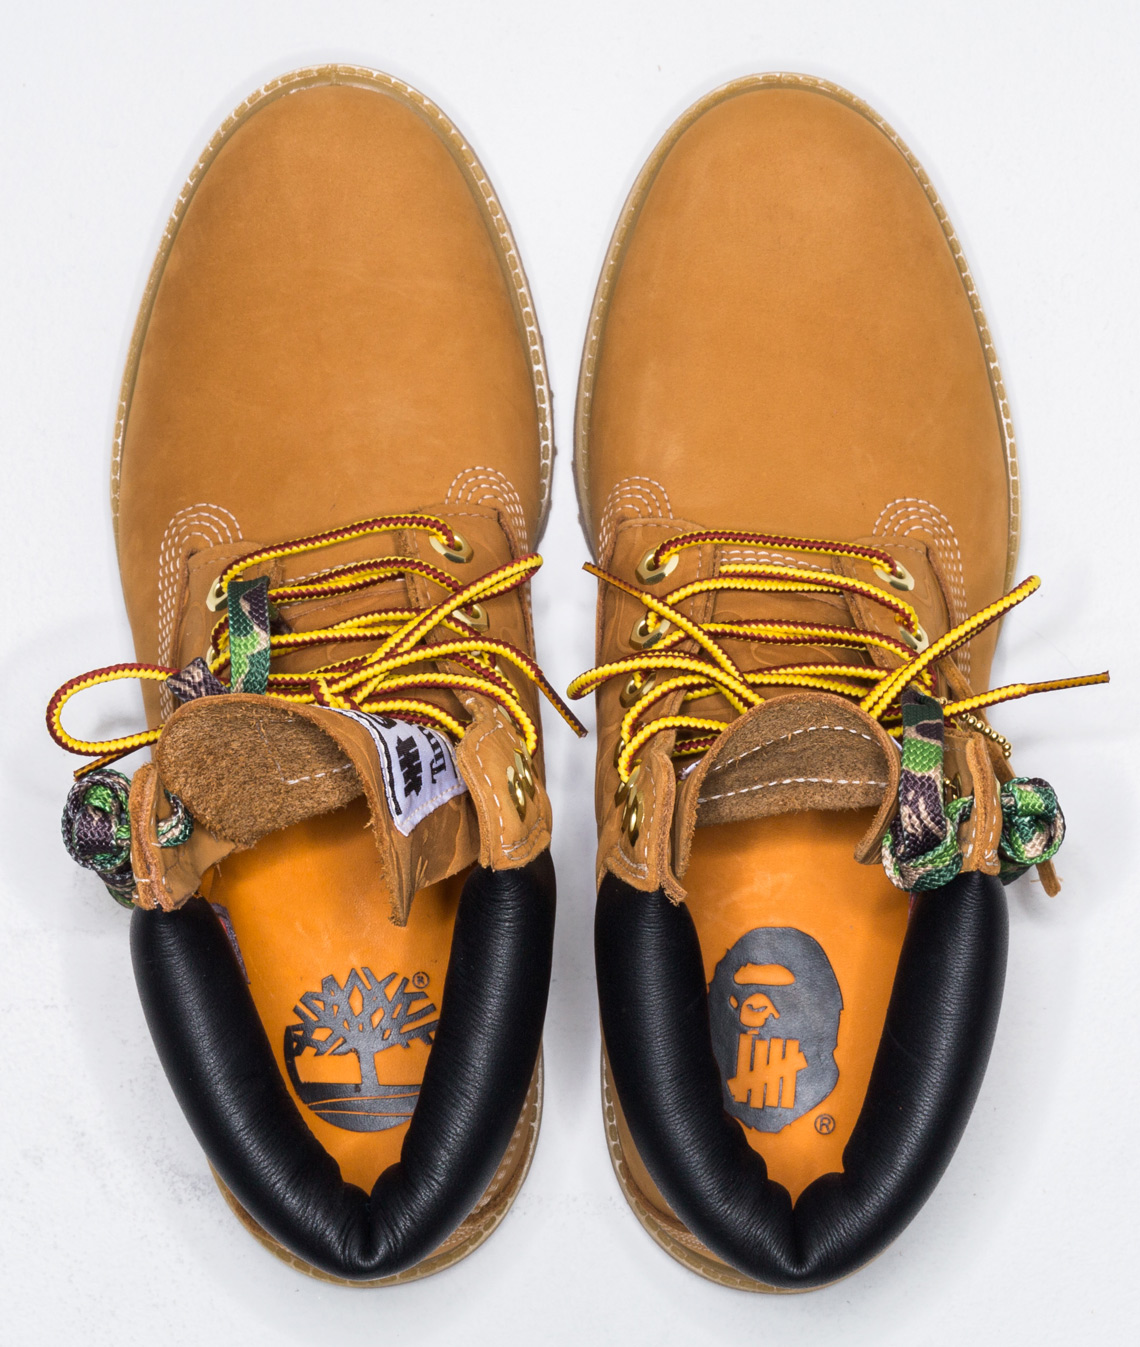 Bape Undefeated Timberland Wheat 6 Inch Boots 4